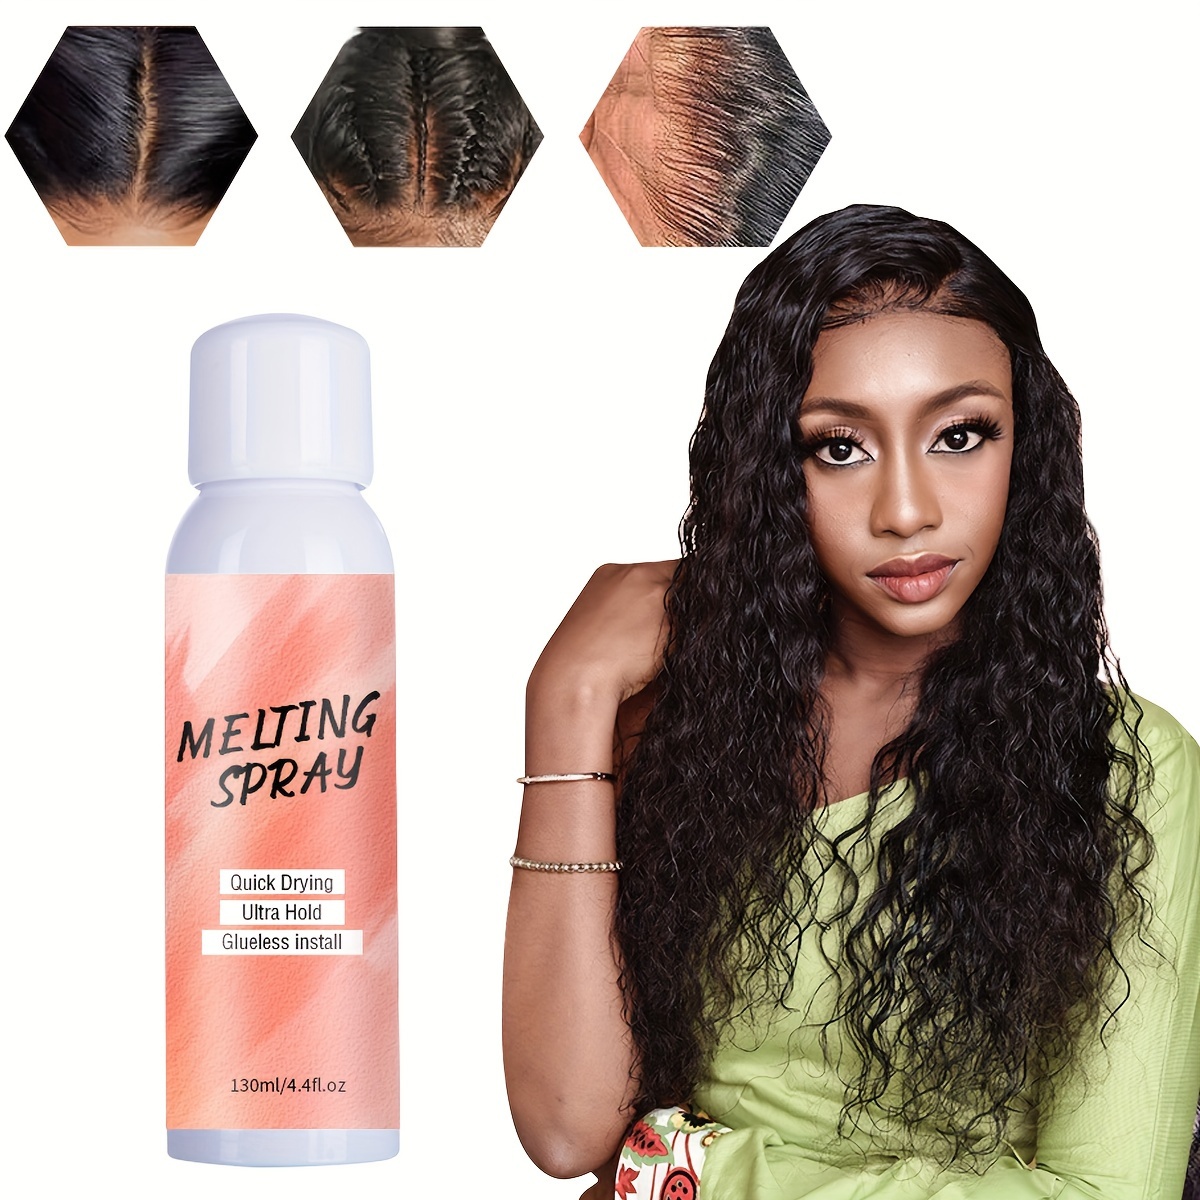 Melting Spray For Lace Wigs Glueless Install Waterproof Quick